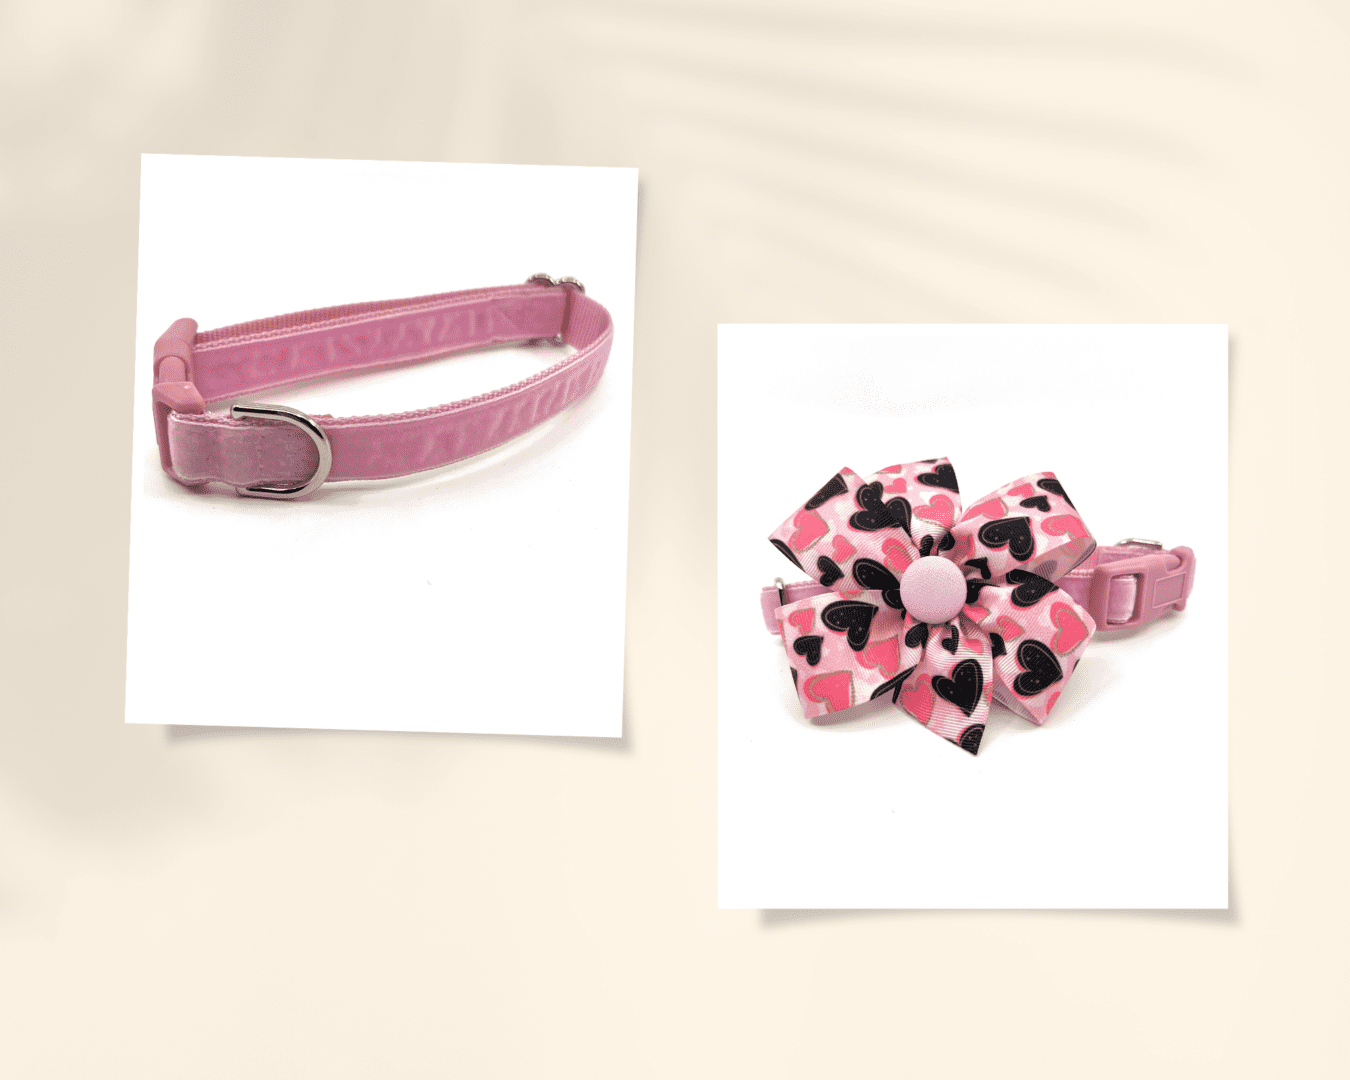 A pink collar and a pink flower pin